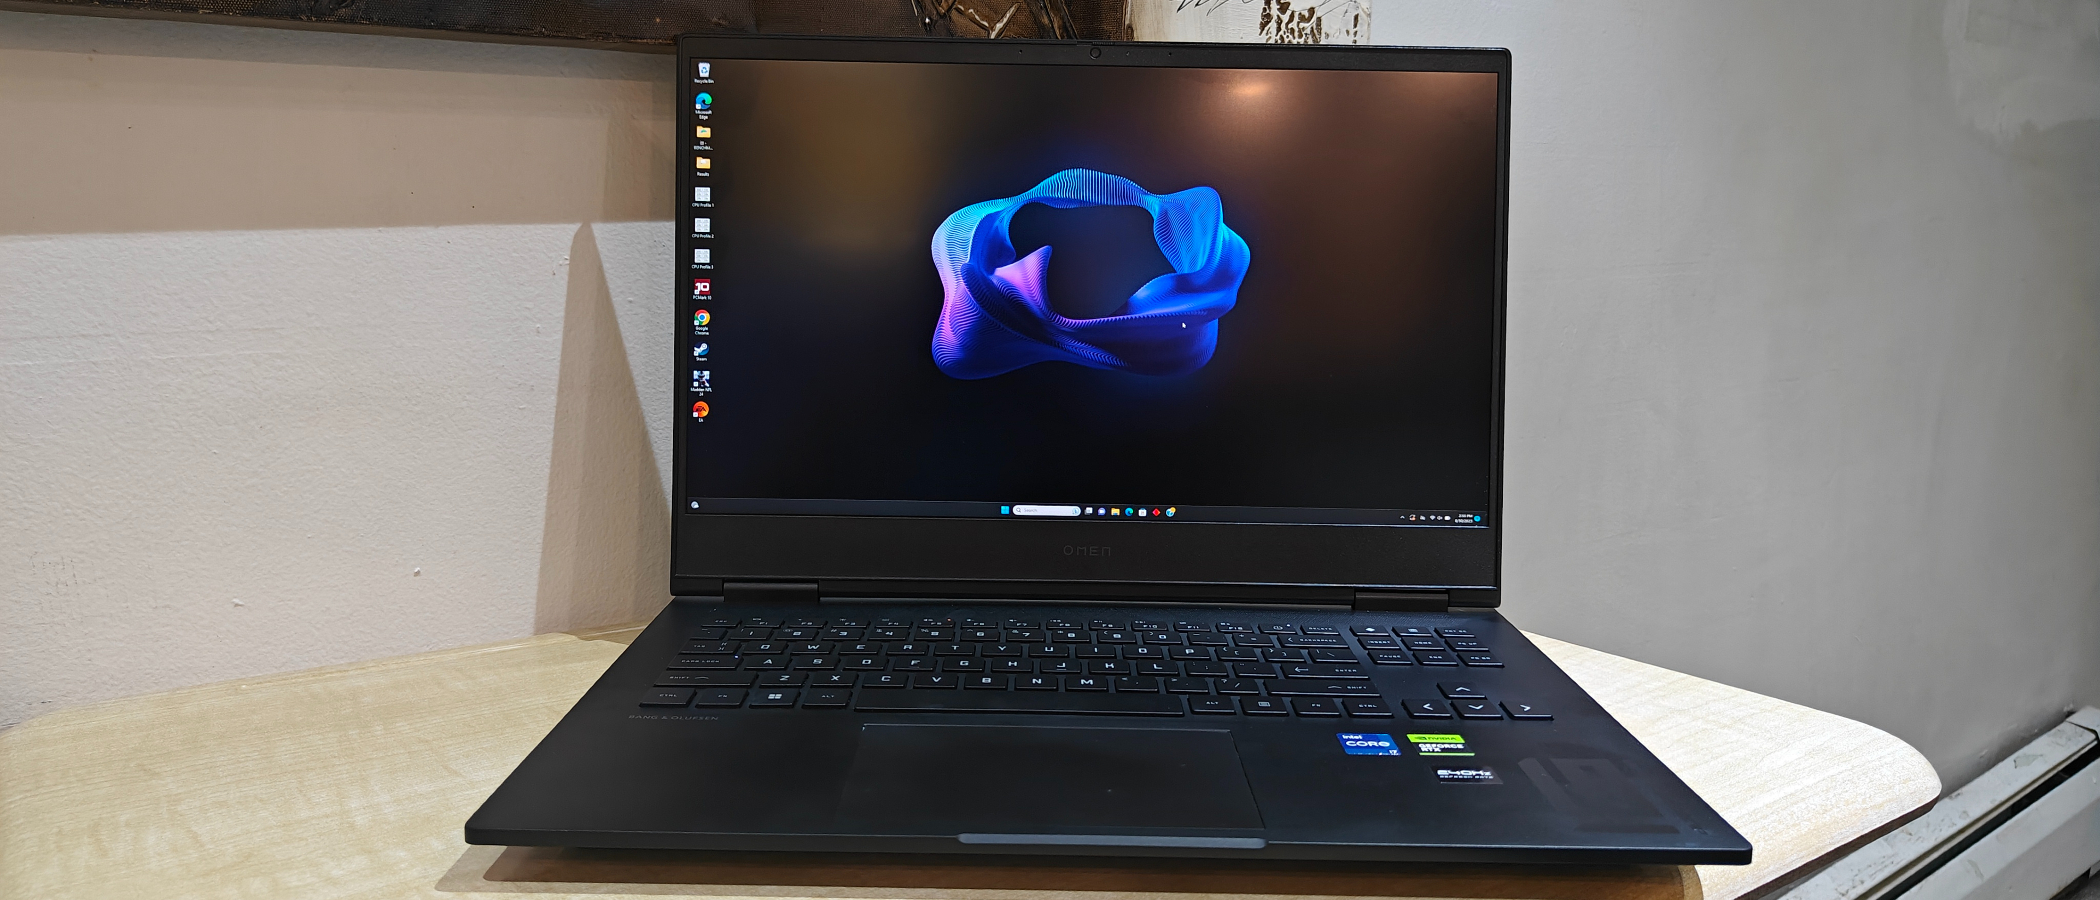 HP Victus 16 review: This 16-inch gaming laptop delivers solid value